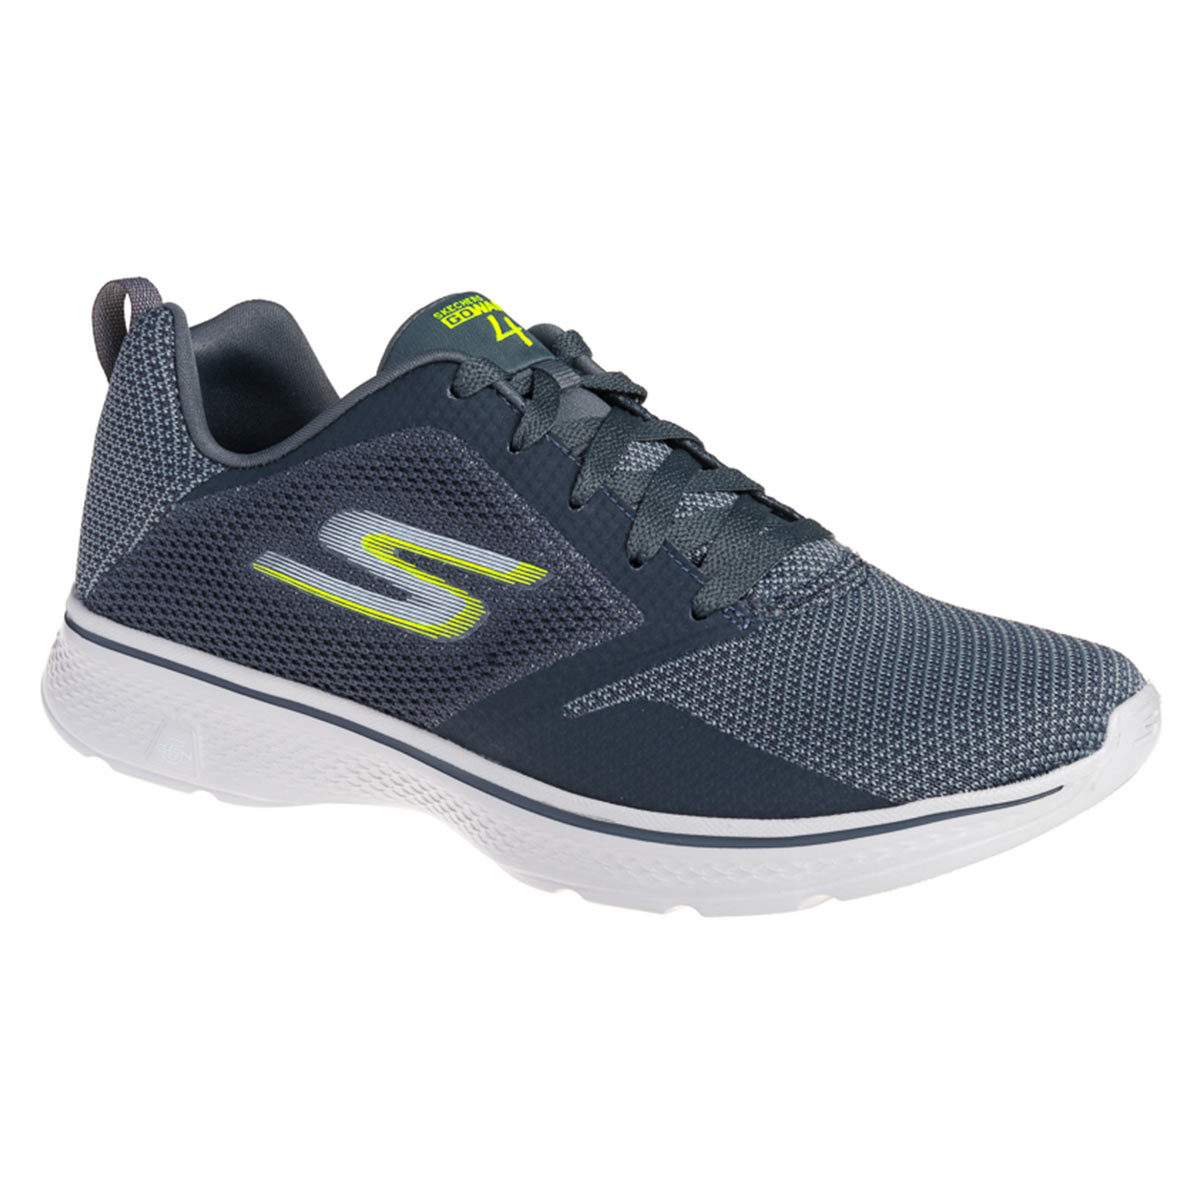 Skechers GOwalk 4 Lace Up Men's Shoes Available in 2 Colours and 5 ...